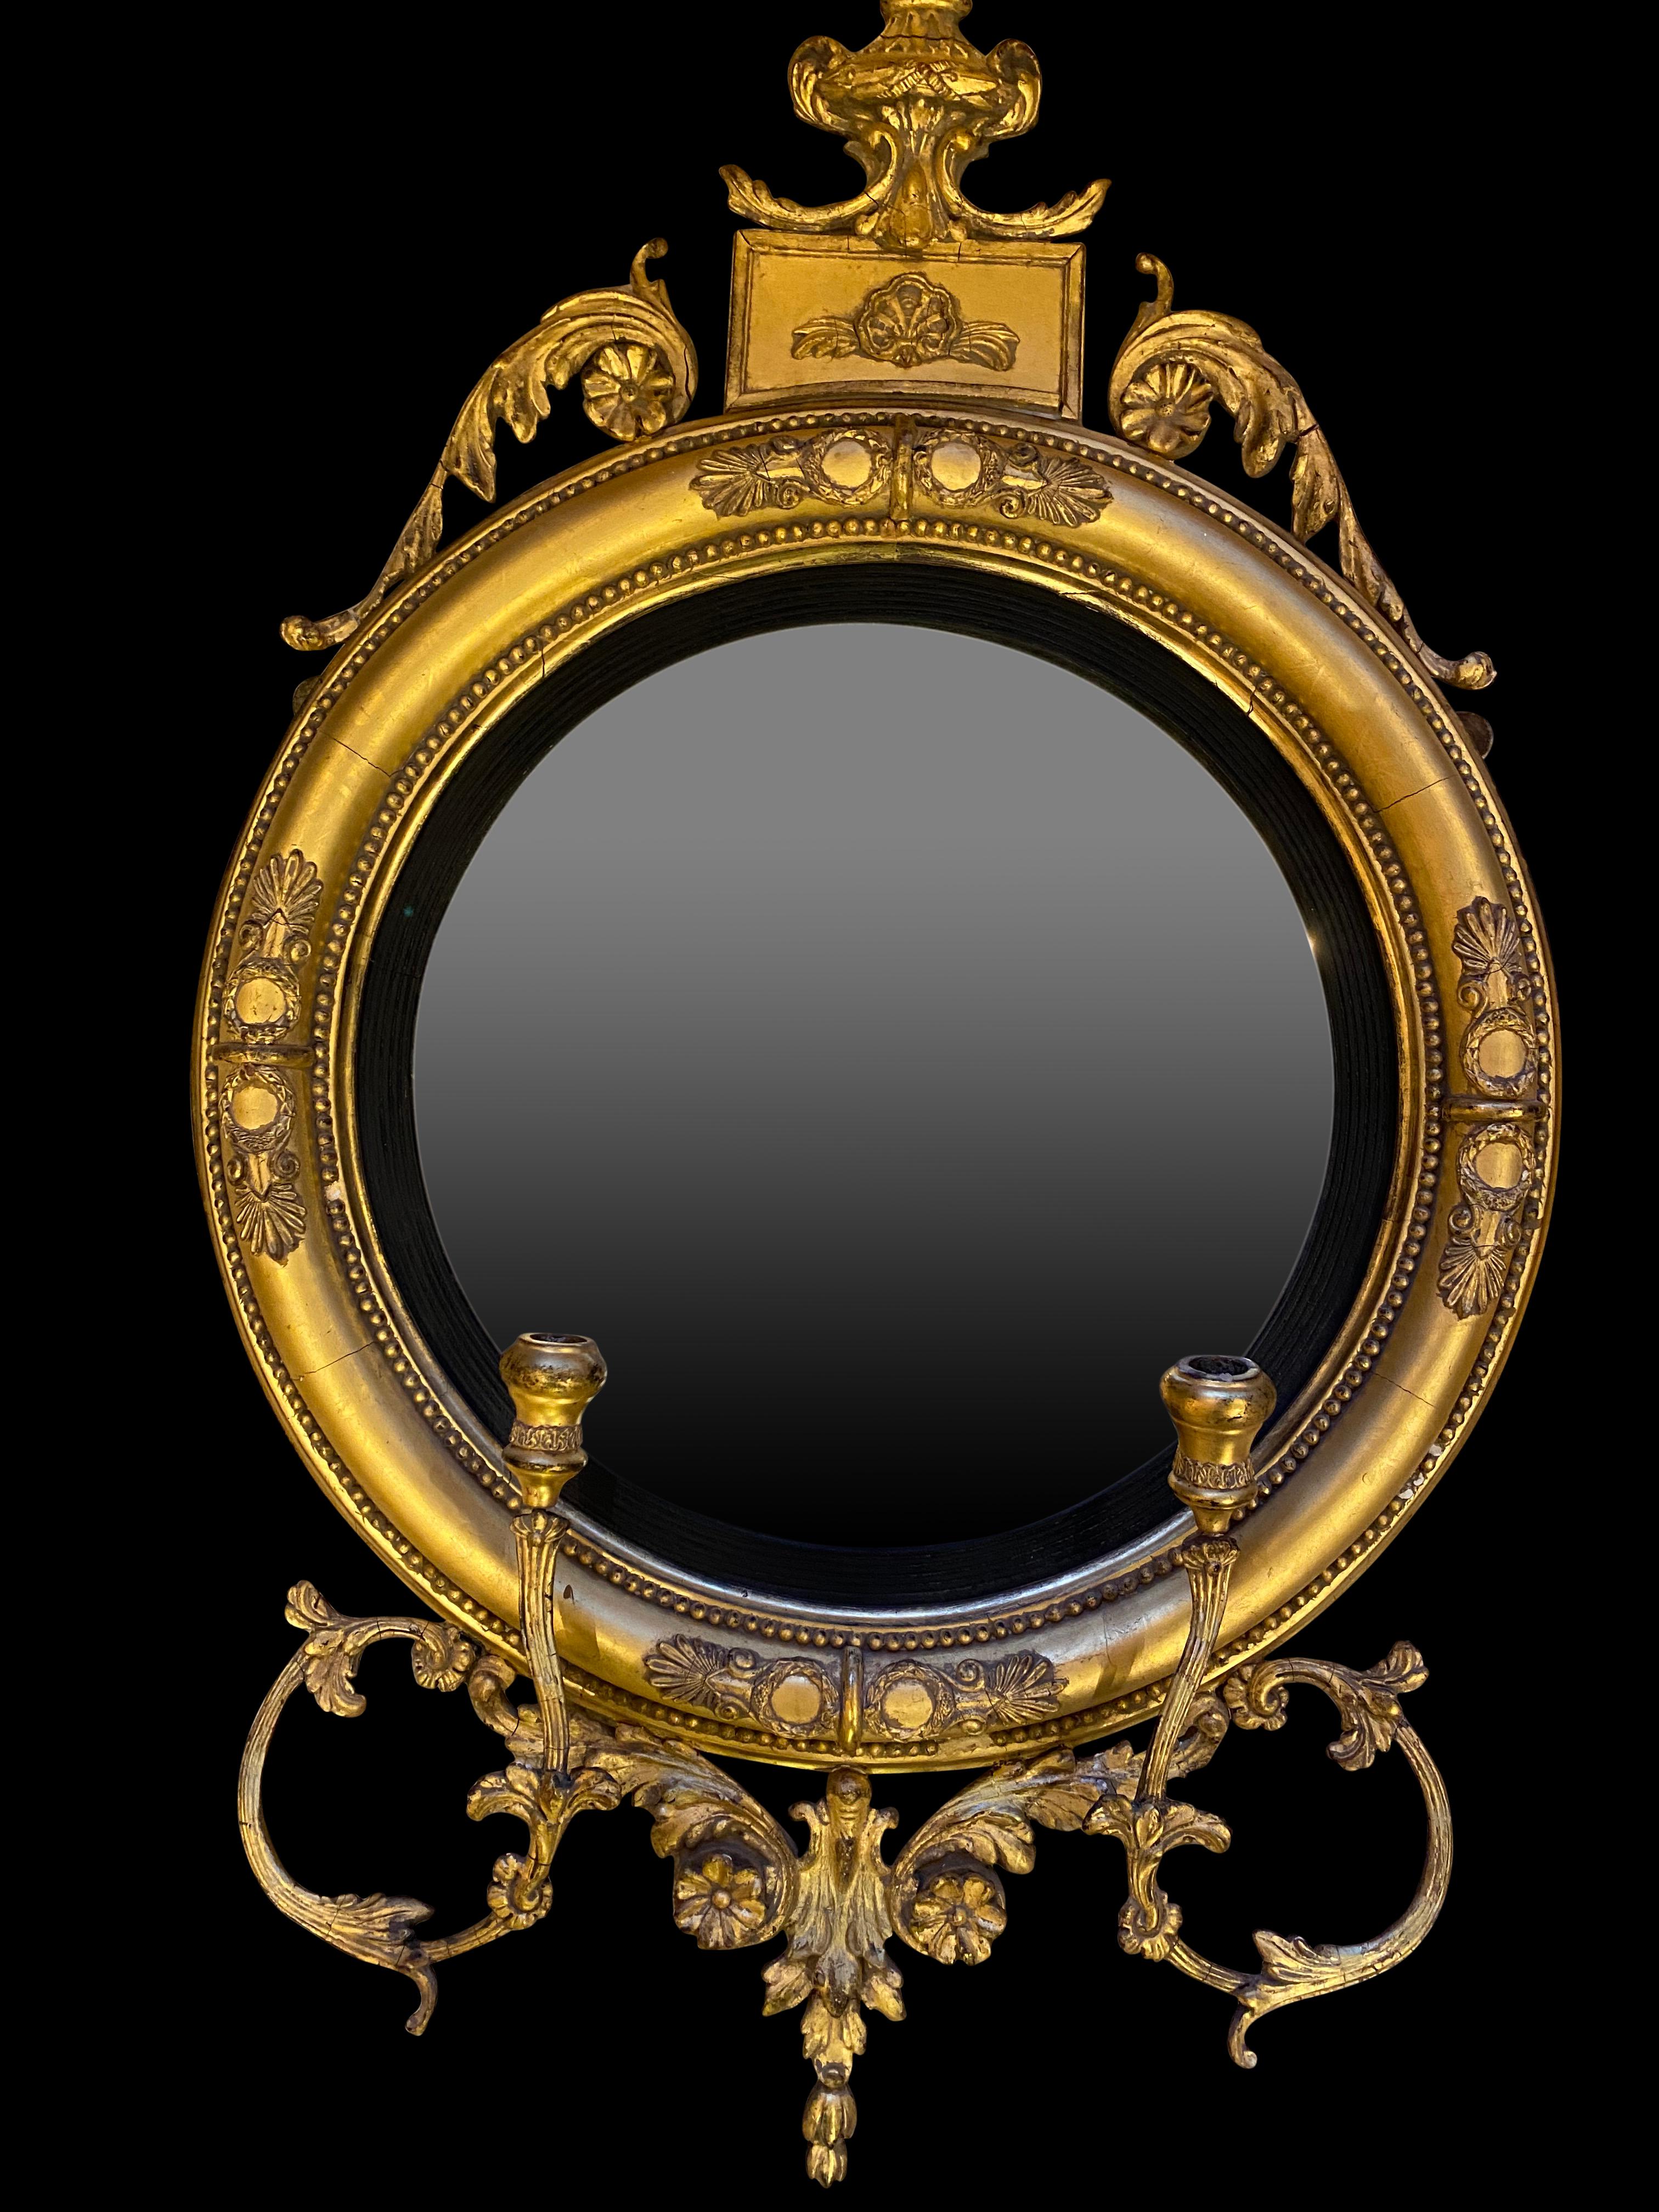 Fine Pair of Regency Convex Mirrors, English, circa 1820 For Sale 1